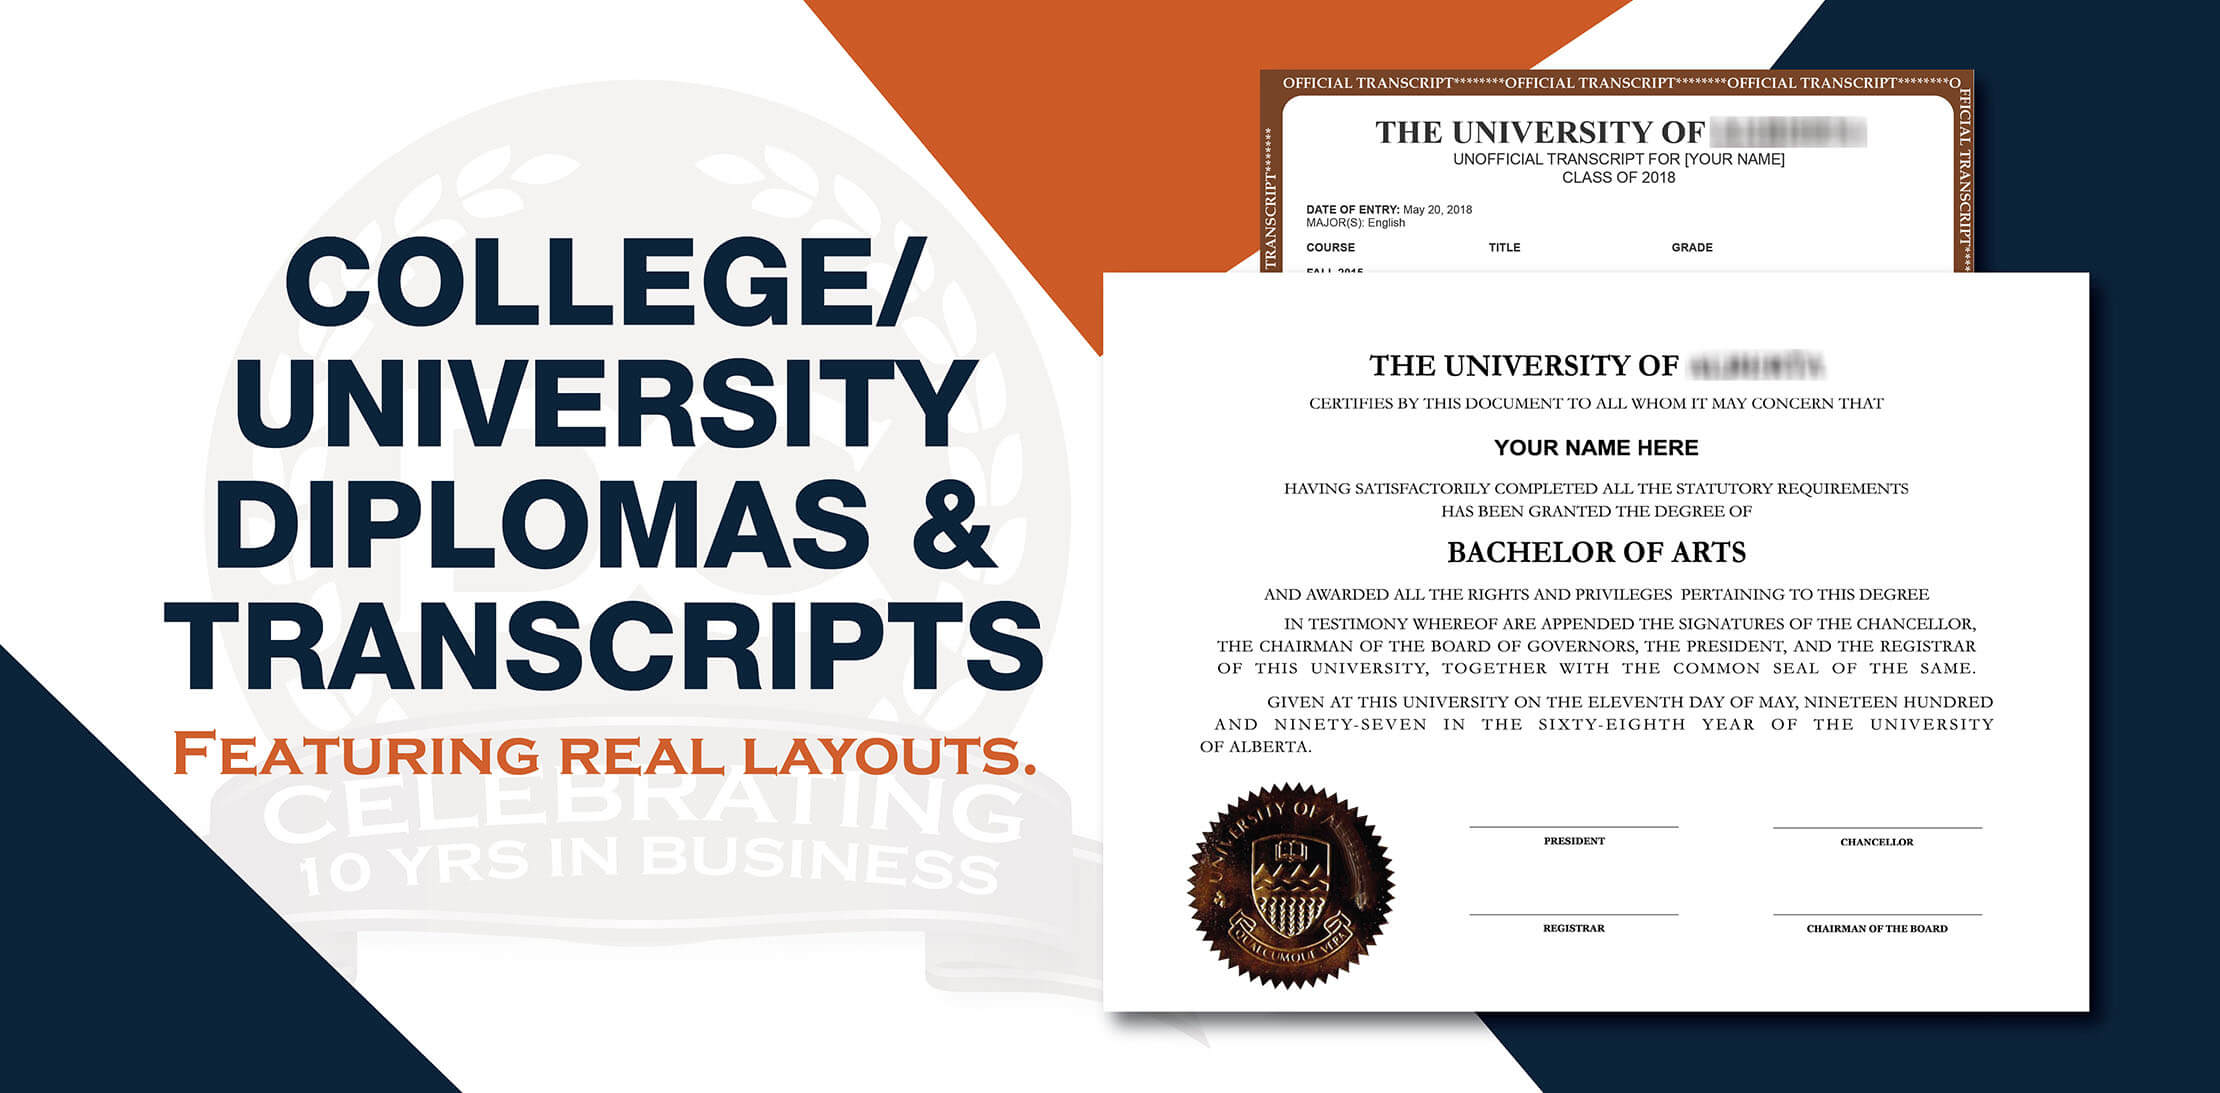 Buy a fake college diploma and transcript sets. Save 20% today! 100% custom-made university packages!
